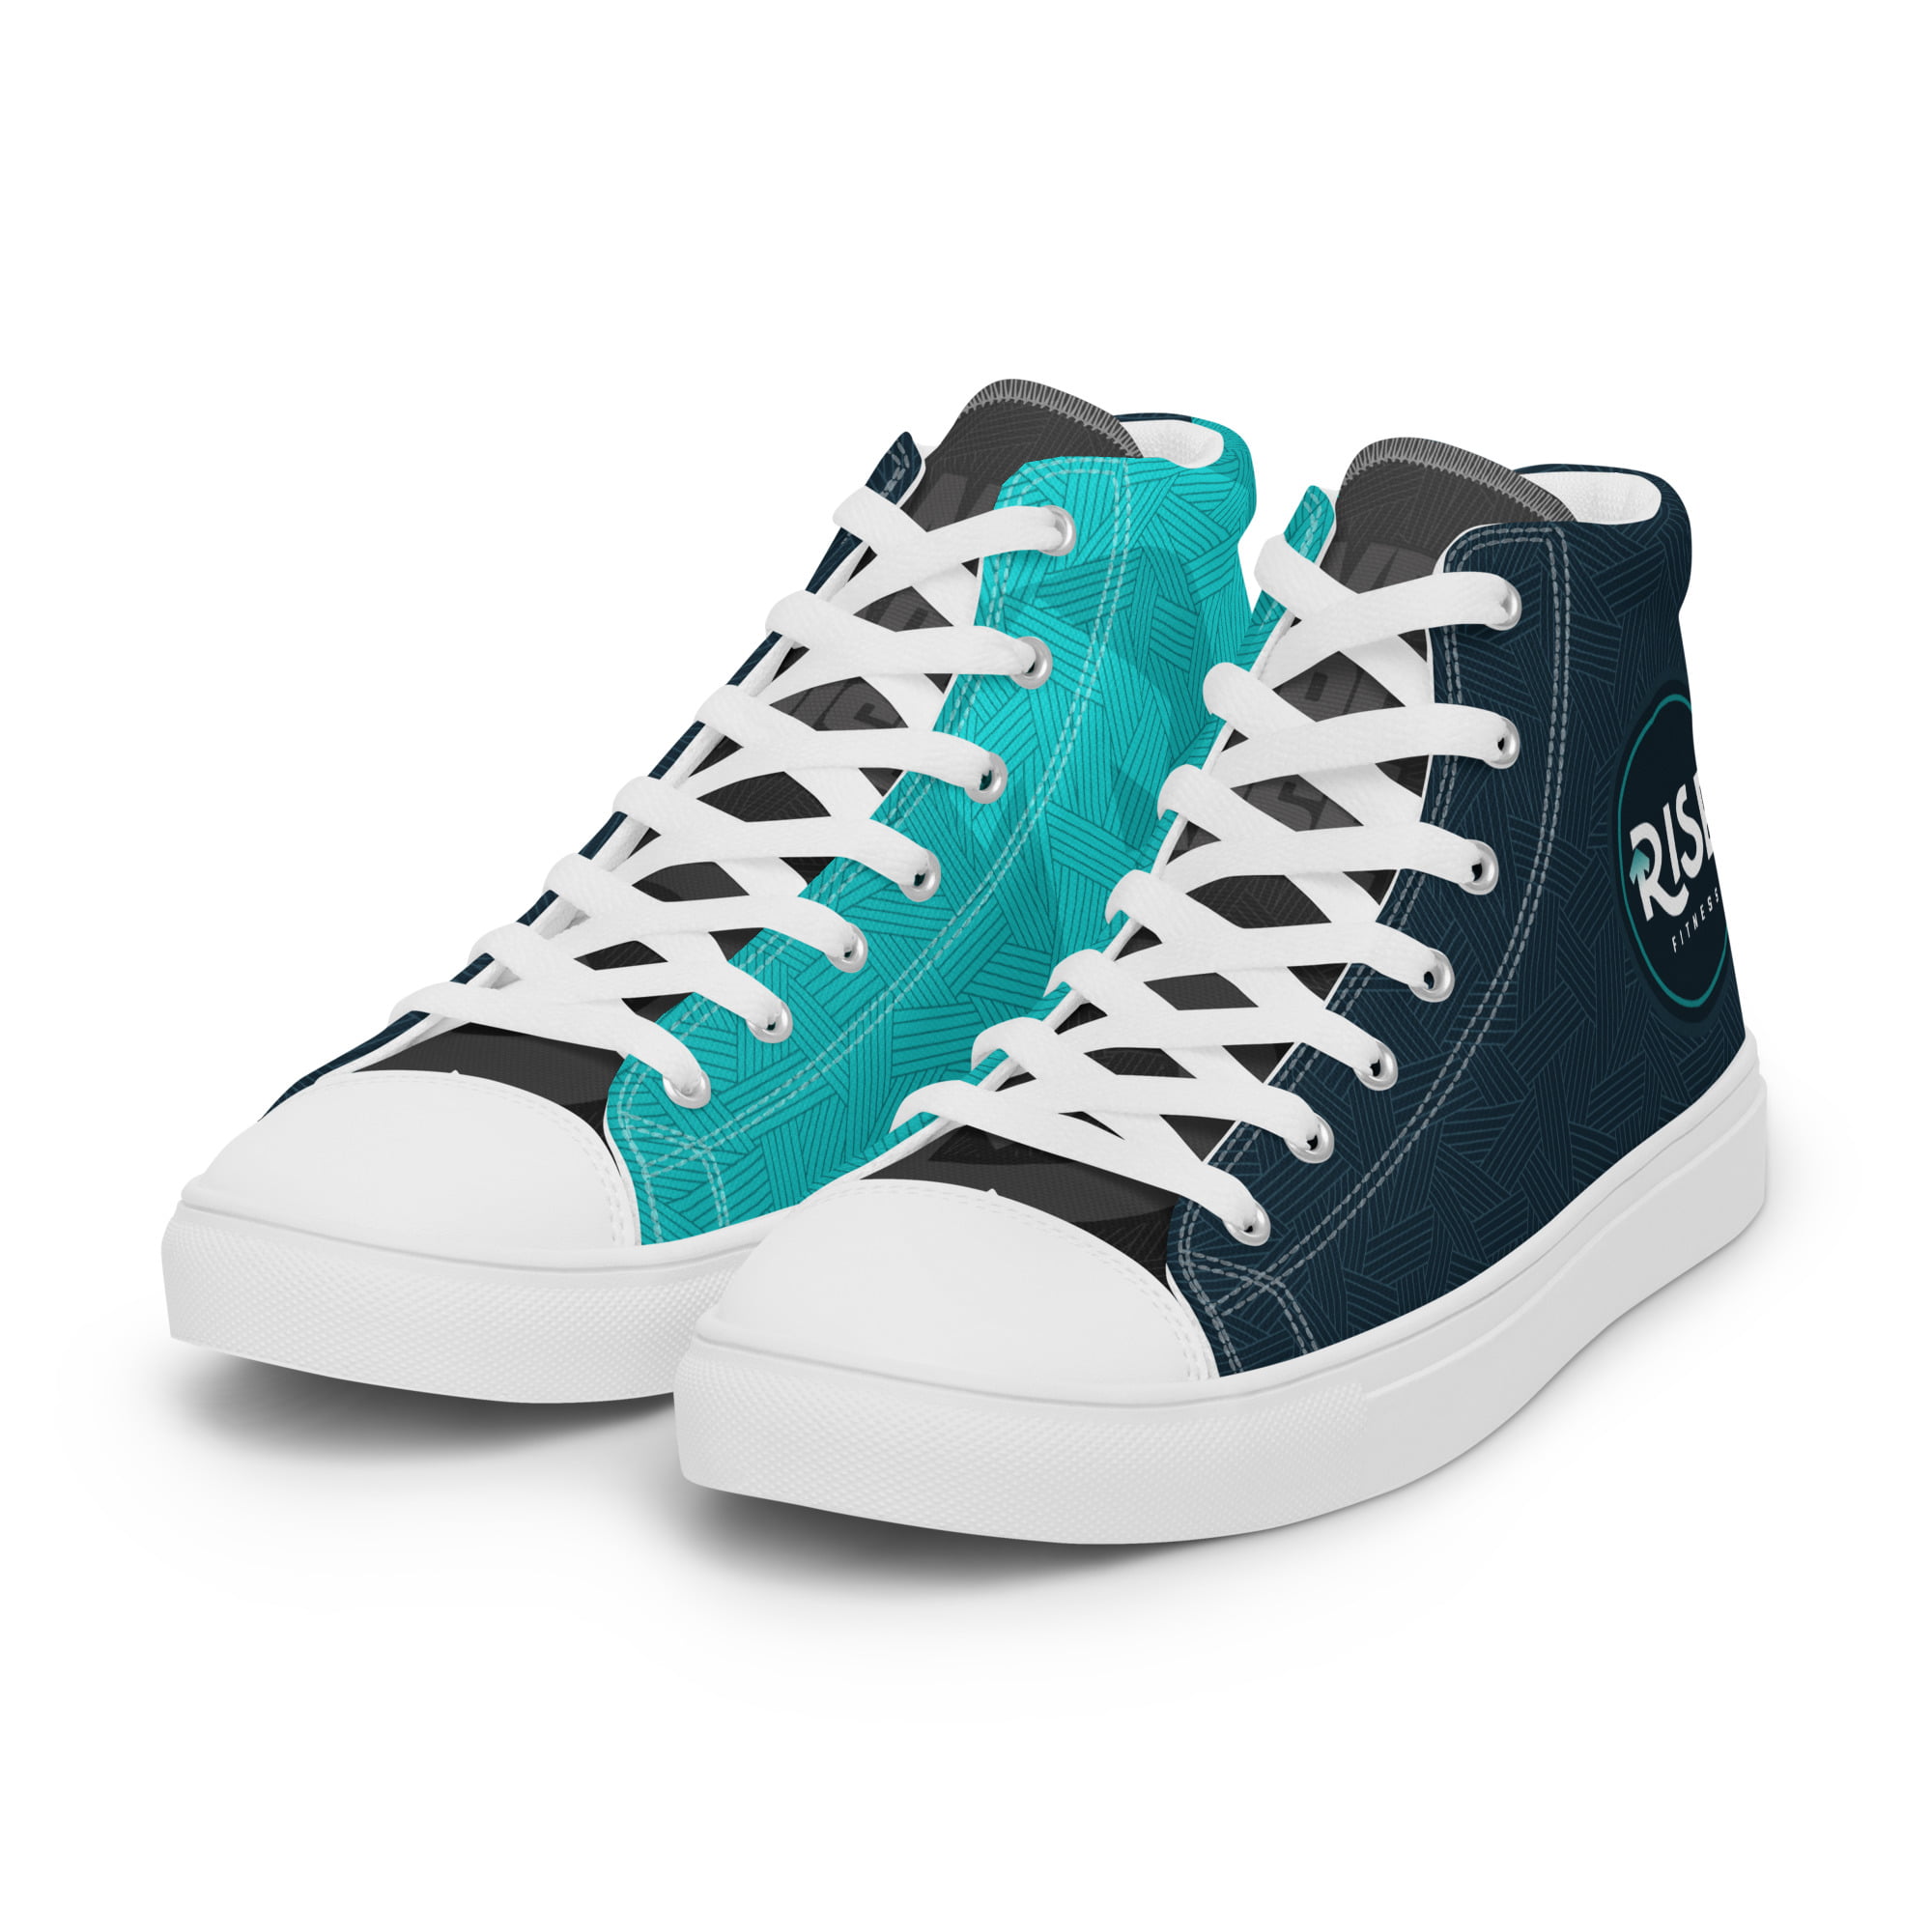 Product image for Men’s high top canvas shoes